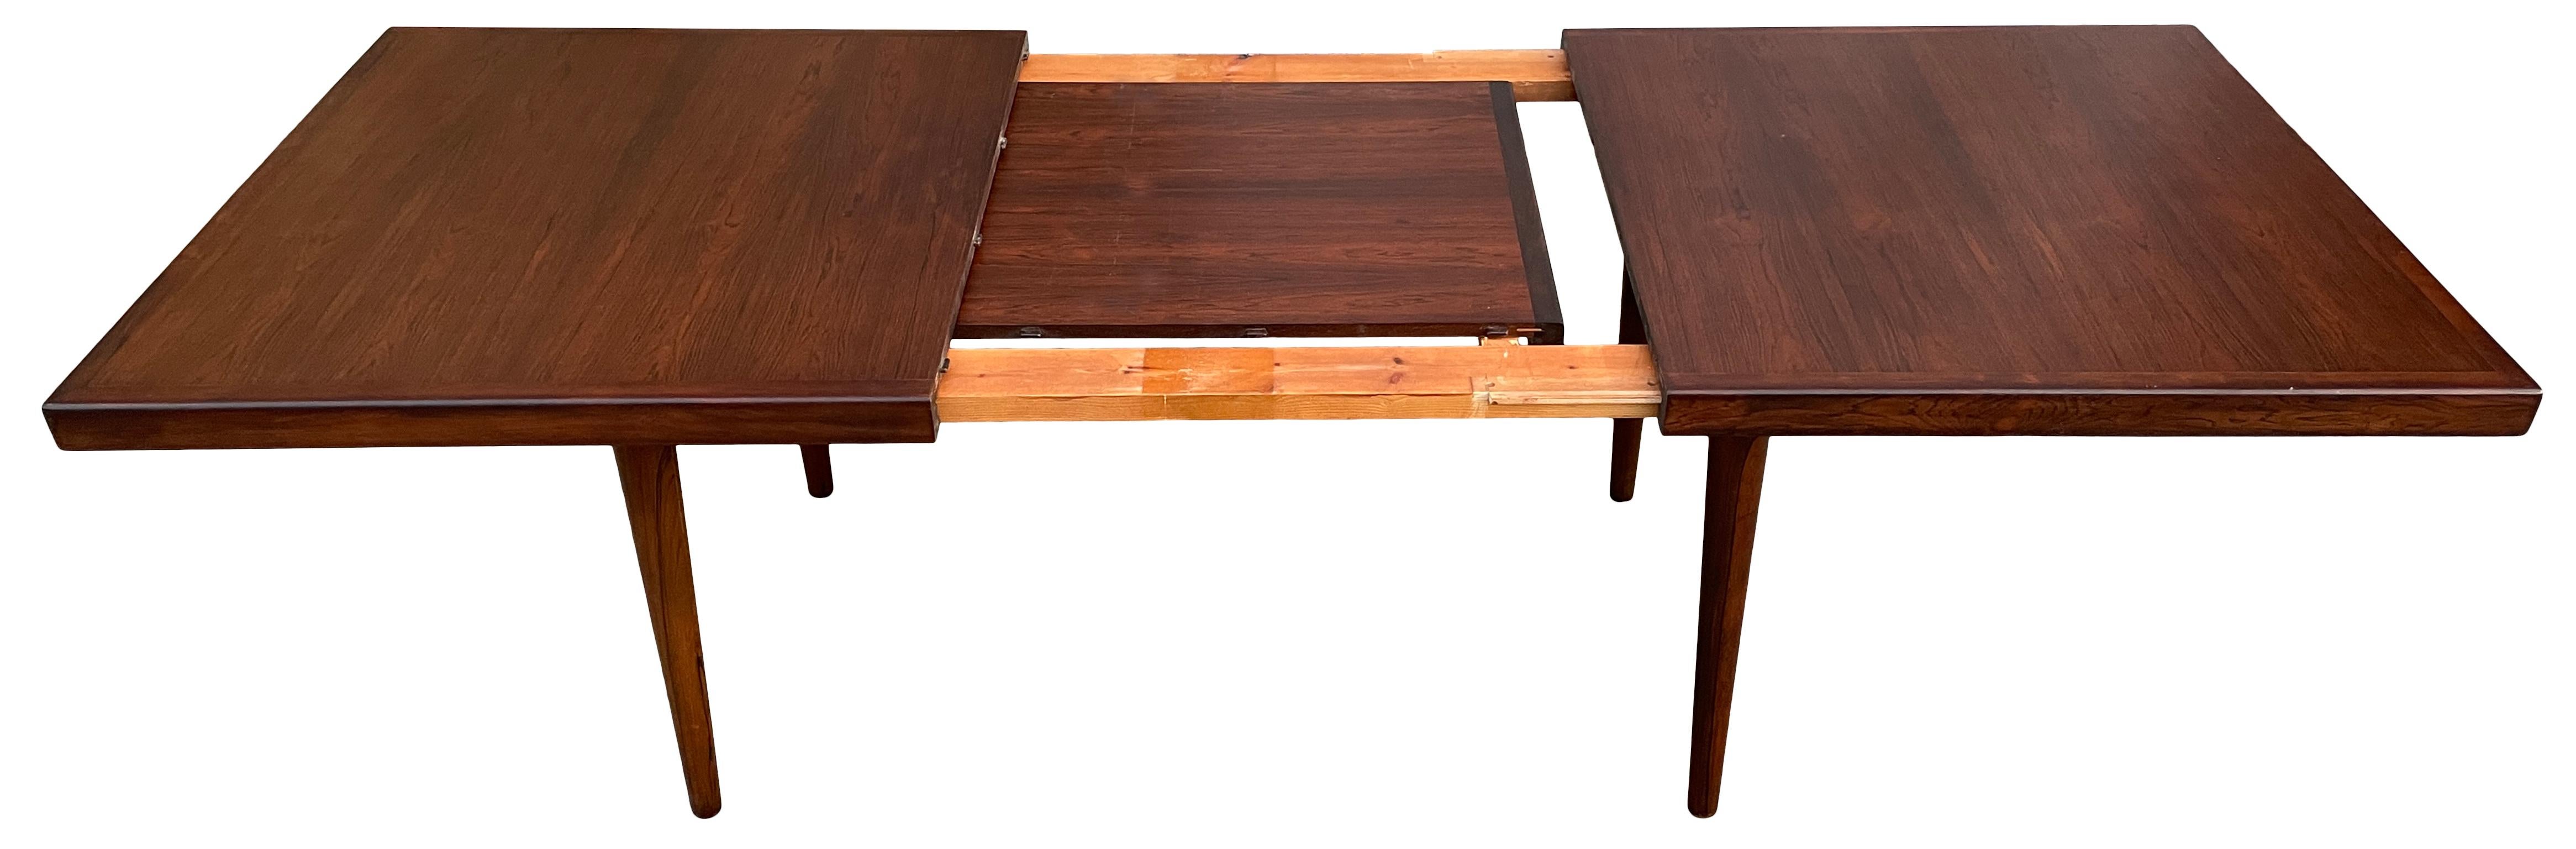 Mid-20th Century Midcentury Rare Solid minimalist Rosewood Expandable Dining Table with 1 Leaf For Sale